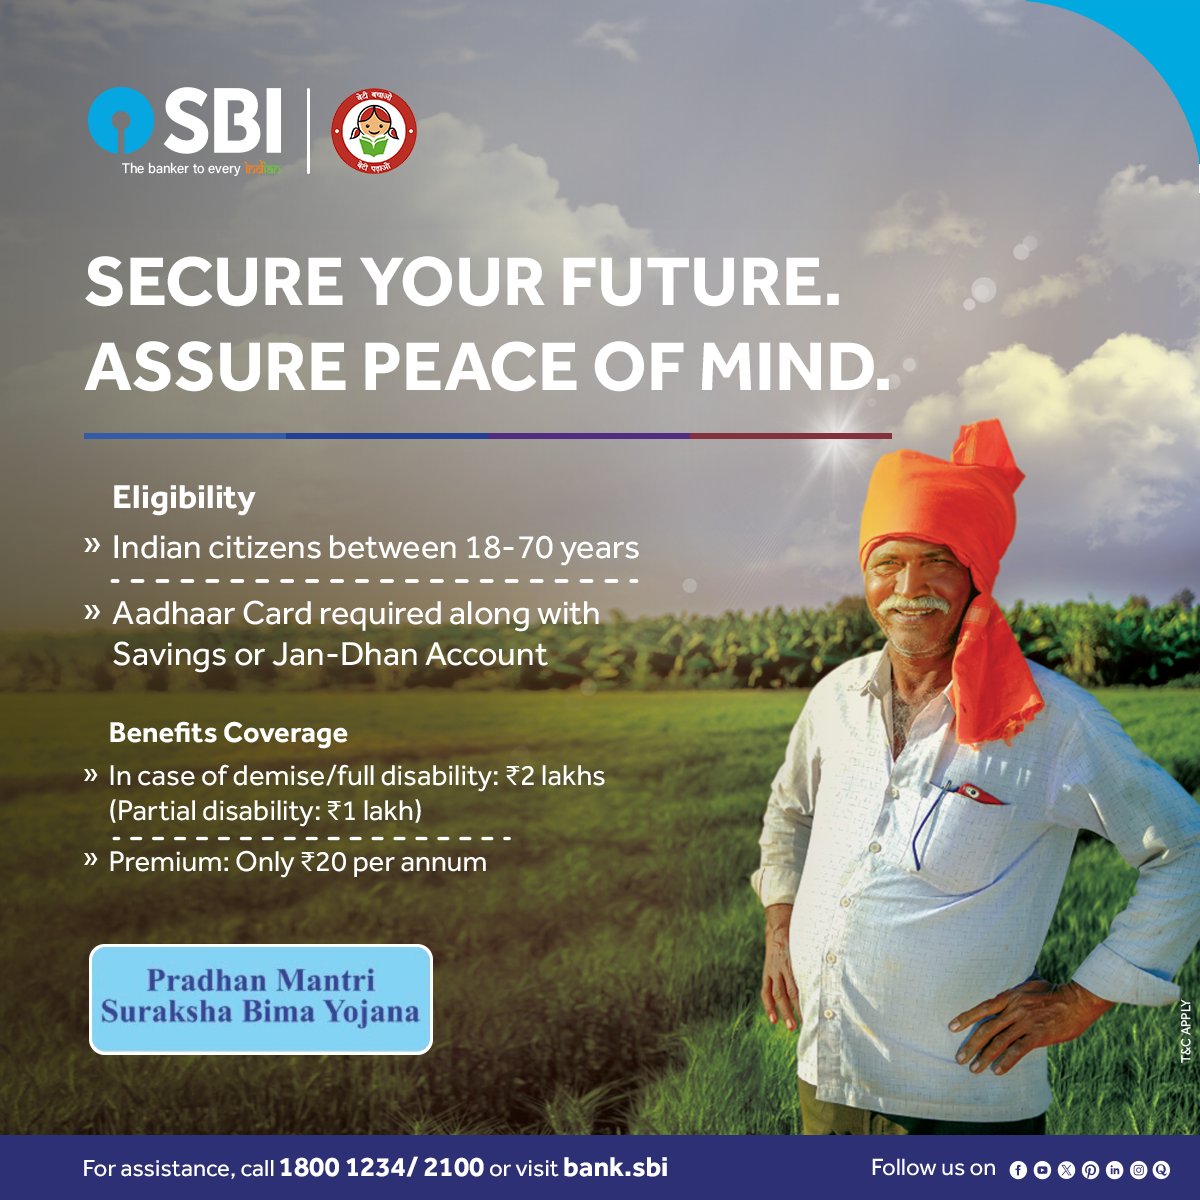 Presenting to you, the Pradhan Mantri Suraksha Bima Yojana, a scheme designed to provide financial protection and peace of mind for all. With only ₹20 per annum, you can ensure your family's security and face life's uncertainties with confidence. Join us in securing your future